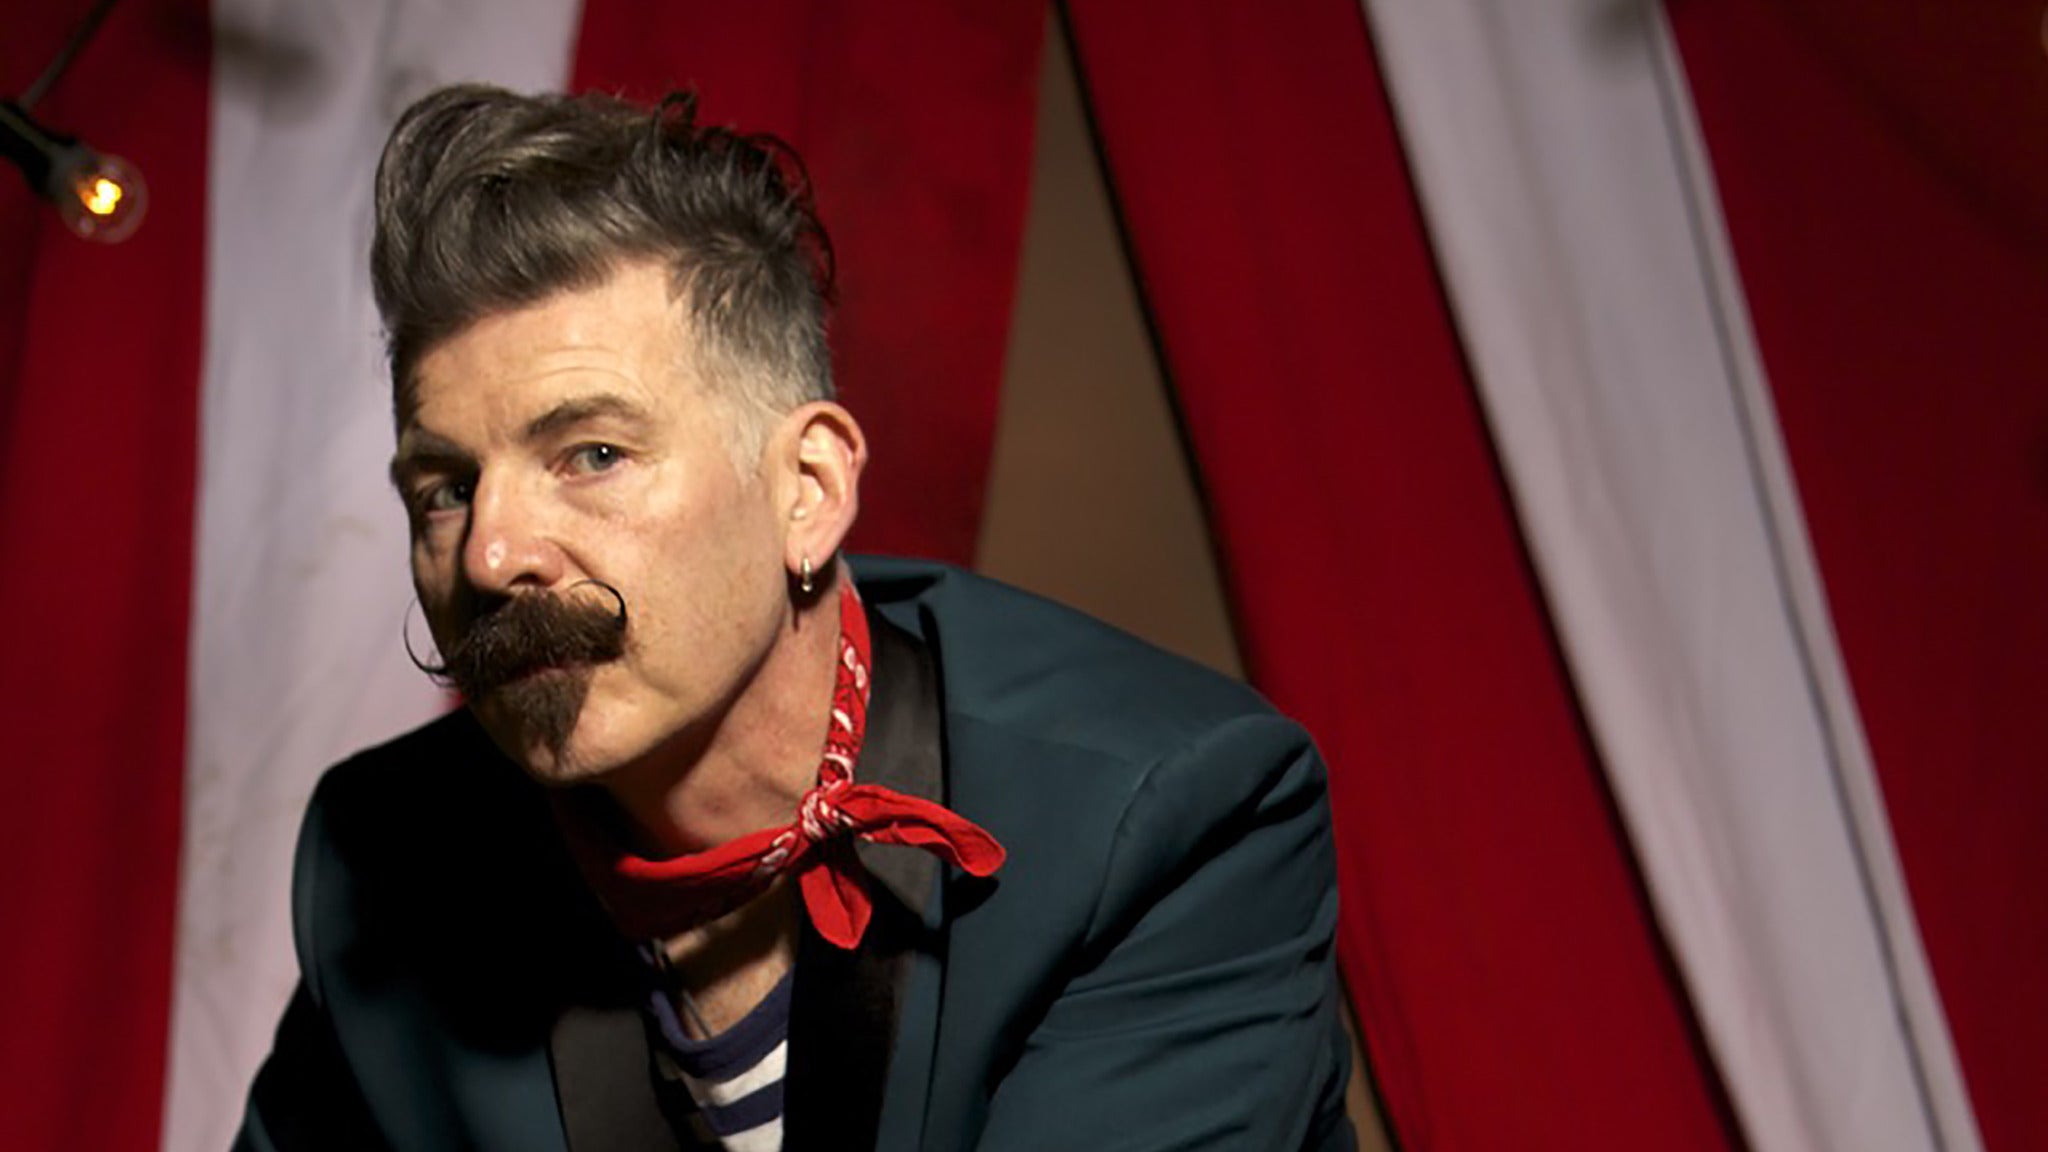 Image used with permission from Ticketmaster | Jerry Fish tickets